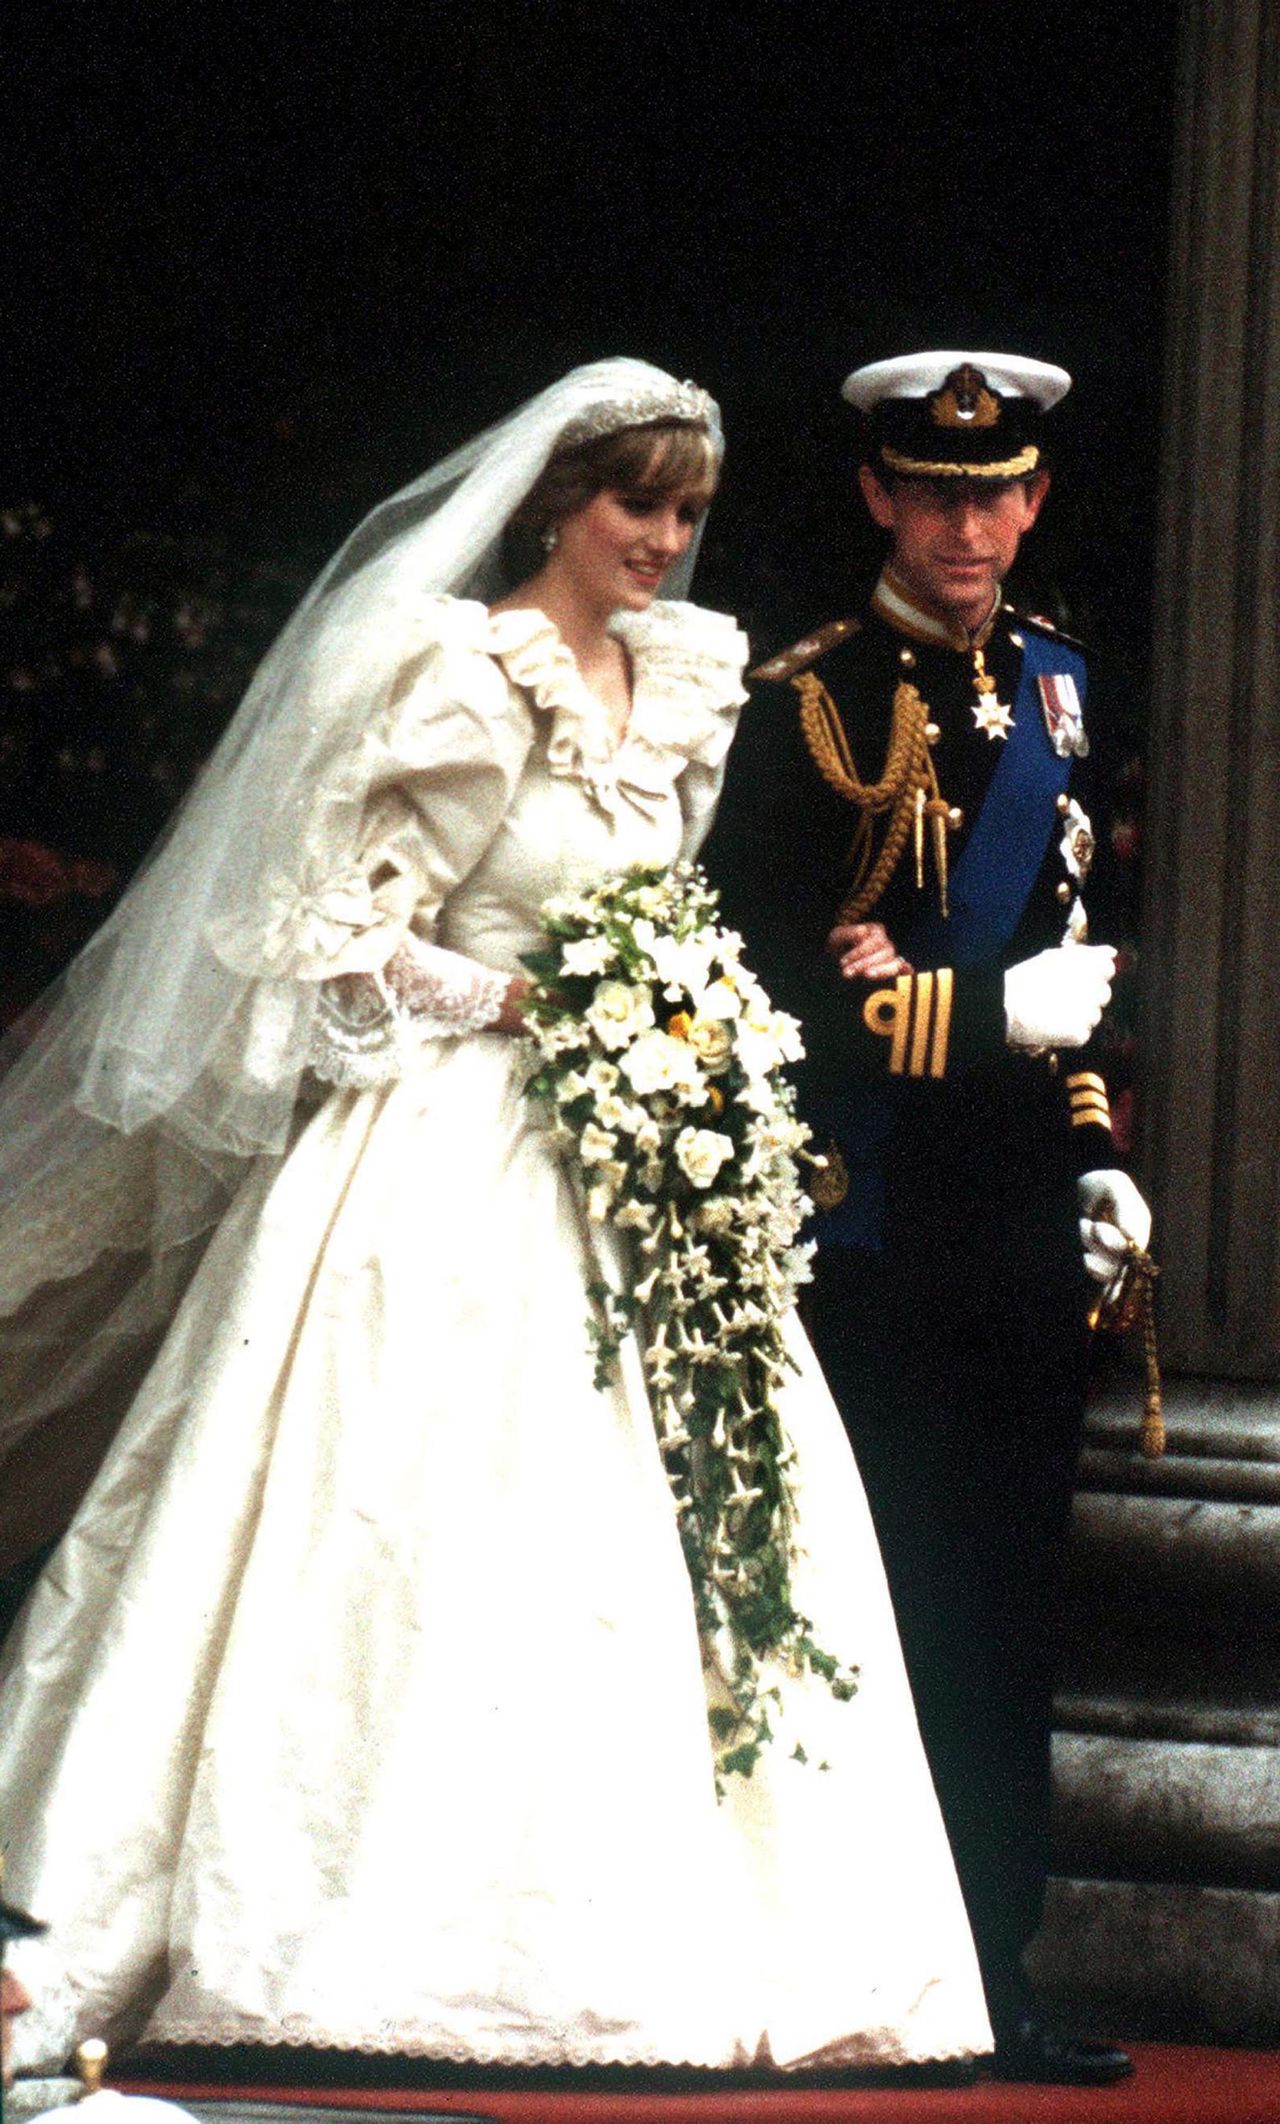 Princess Diana opted for a dress designed by the Emanuels, while Prince Charles opted to wear military uniform